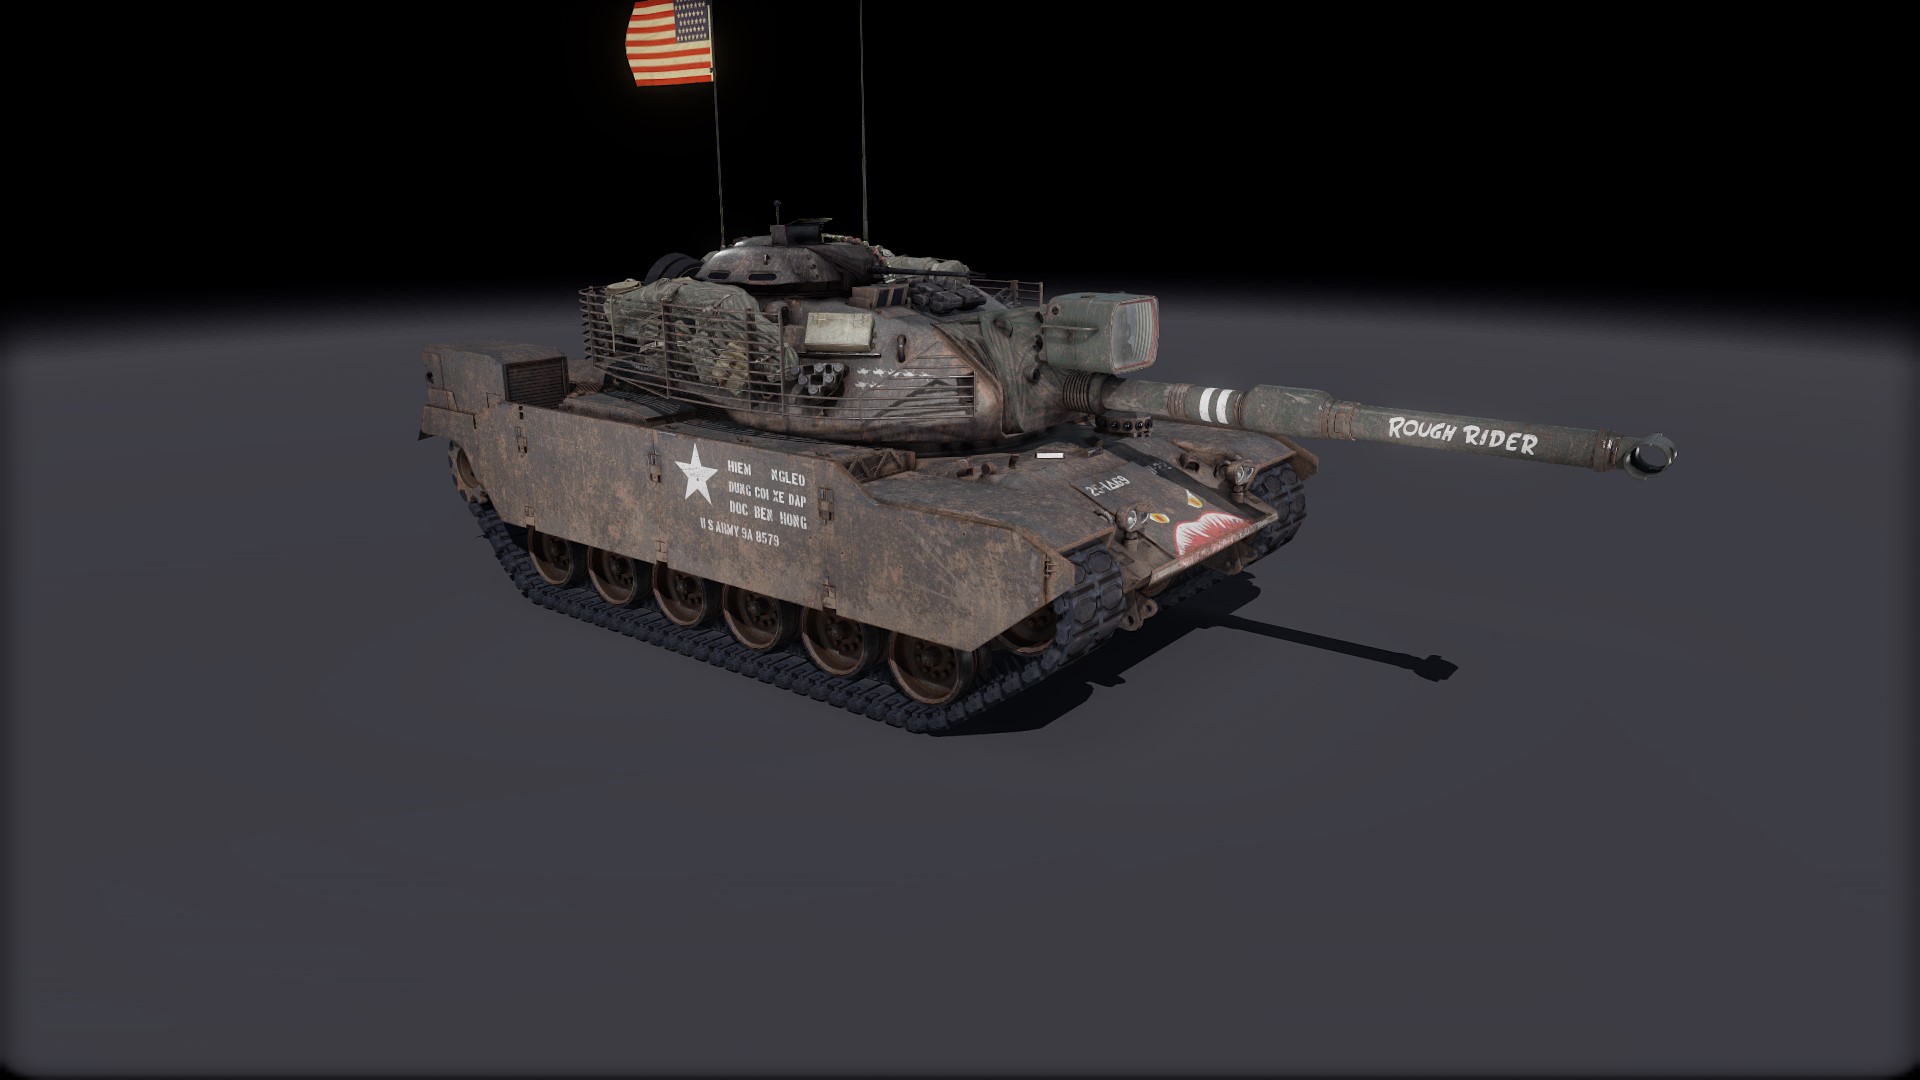 The upcoming Riders on the Storm event is bringing not only the M60A3 SLEP ...